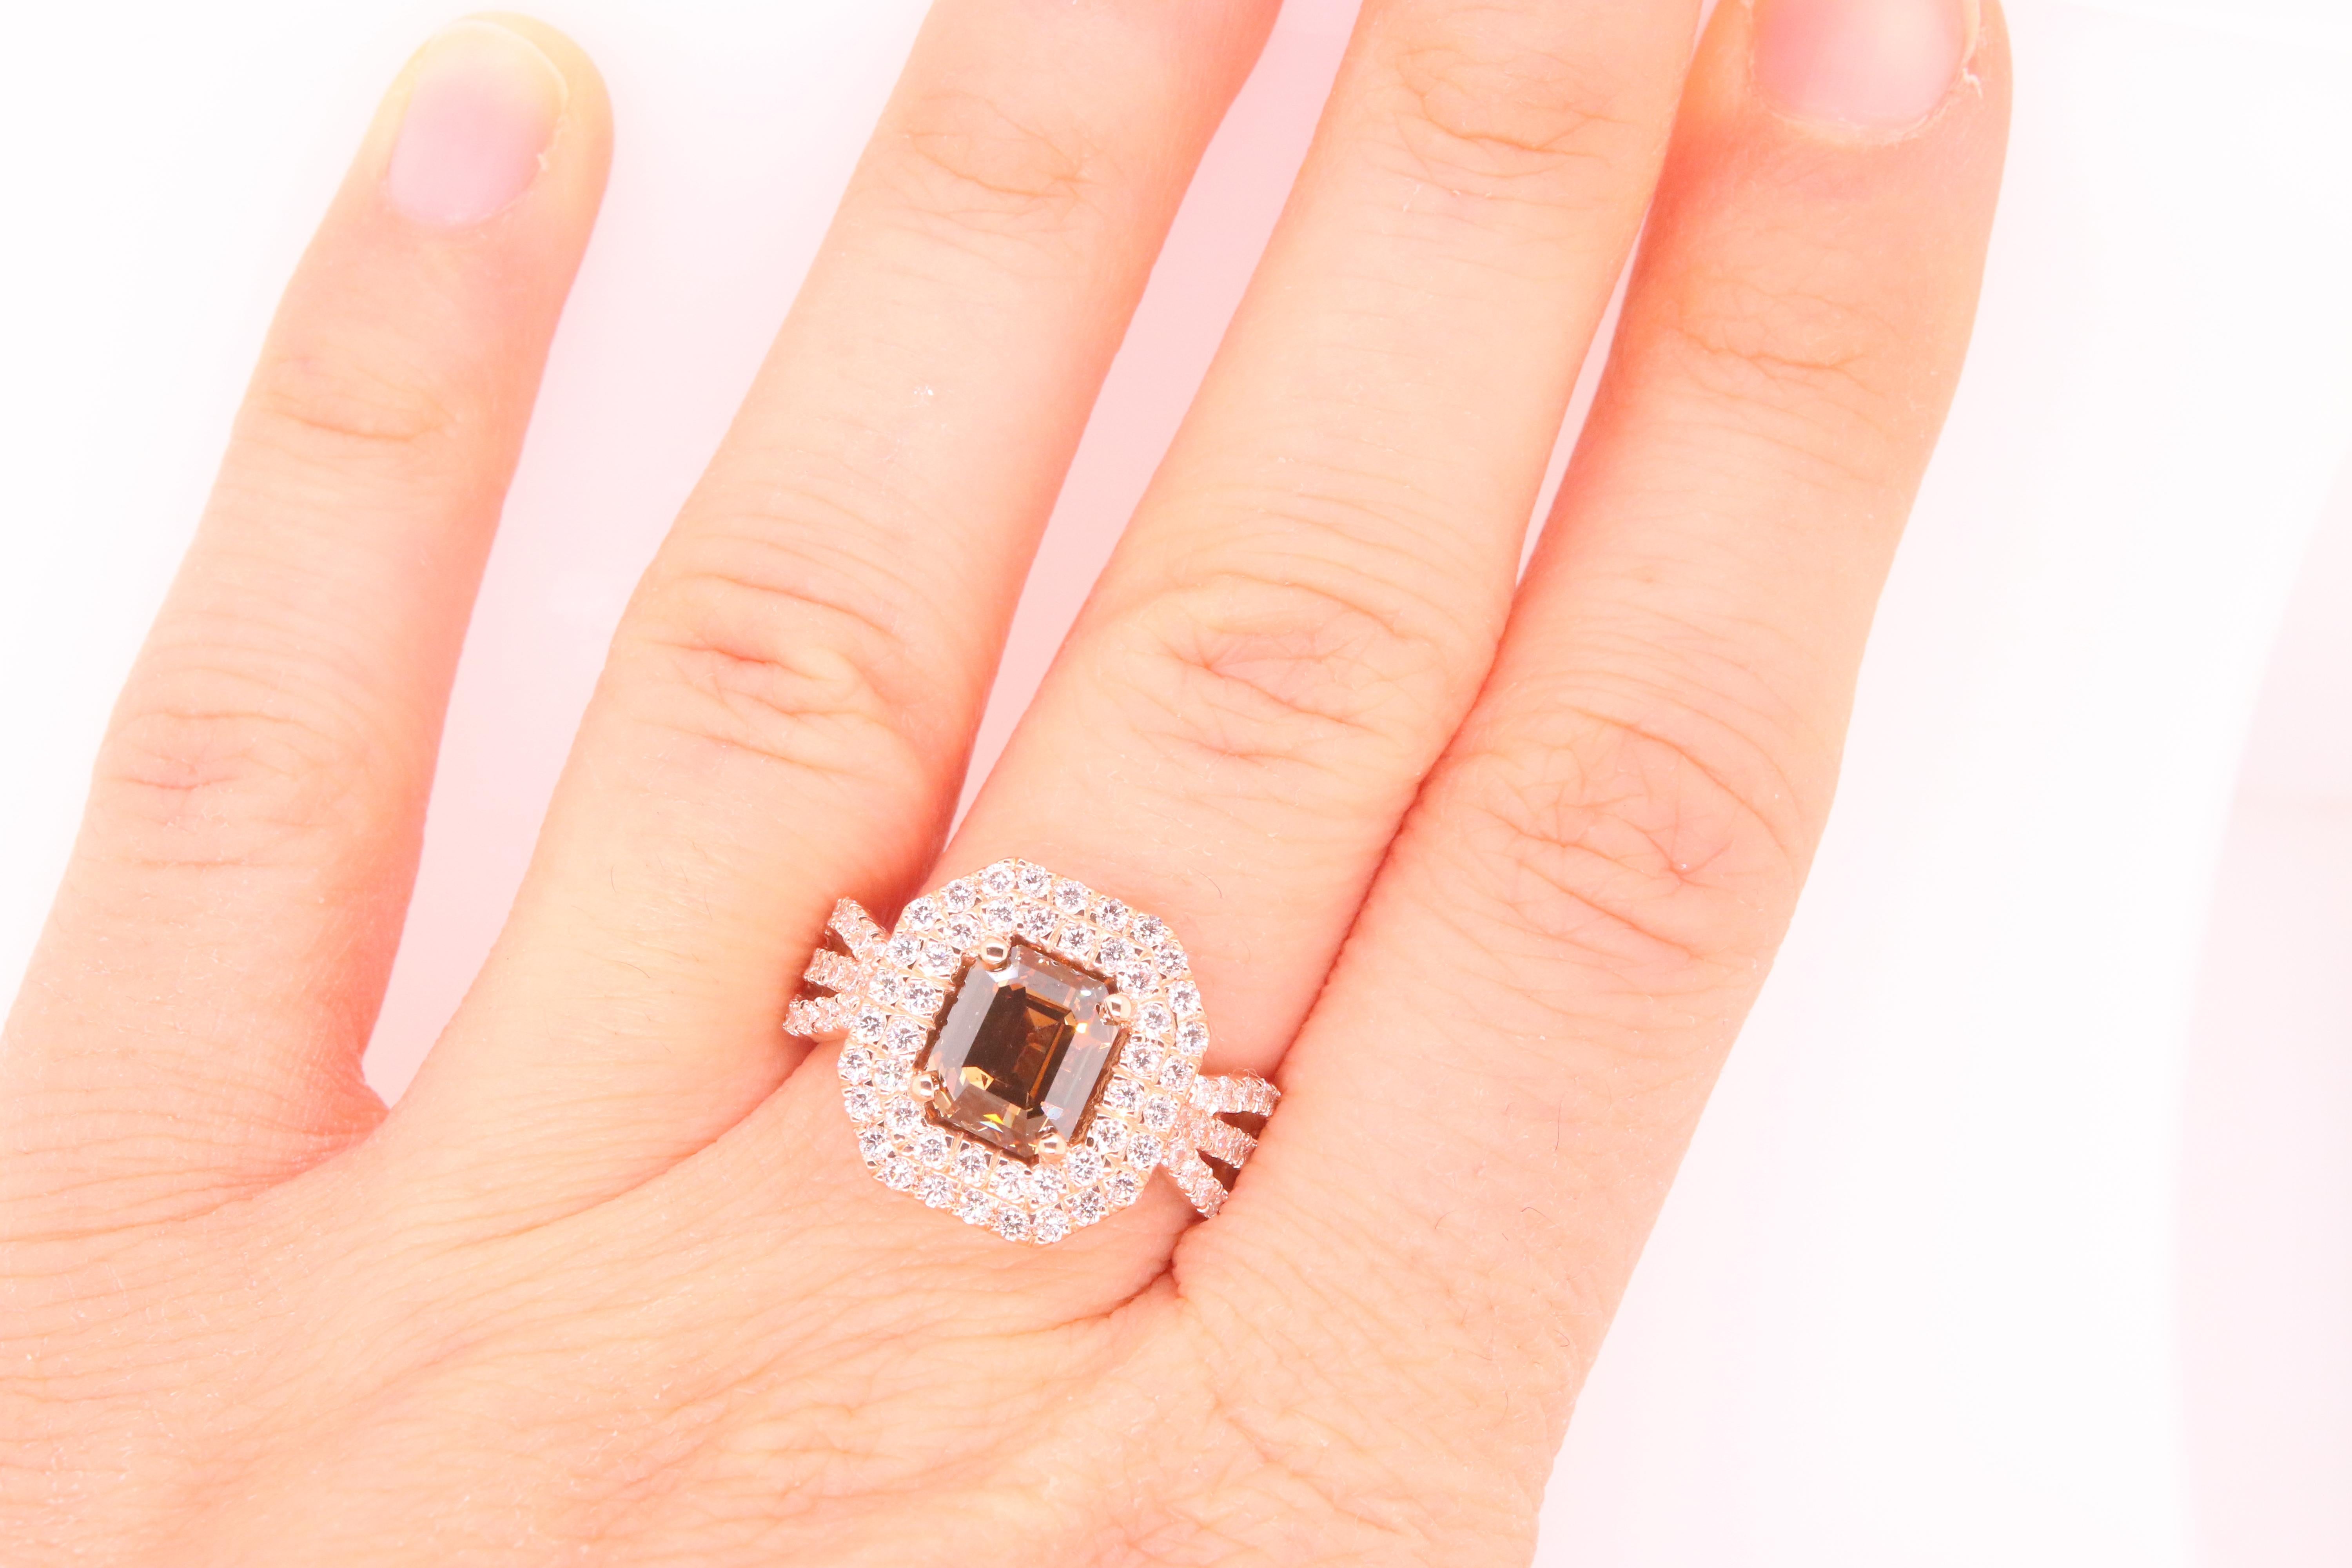 Material: 14k Rose Gold 
Center Stone Details: 1 Emerald Cut Natural Cognac Color Diamond at 2.32 Carats- Measuring 7.6 x 6.4 mm
Diamond Details: 95 Brilliant Round Diamonds at 1.05 Carats - Clarity: SI / Color:  H-I
Ring Size: Size 6.5. Alberto